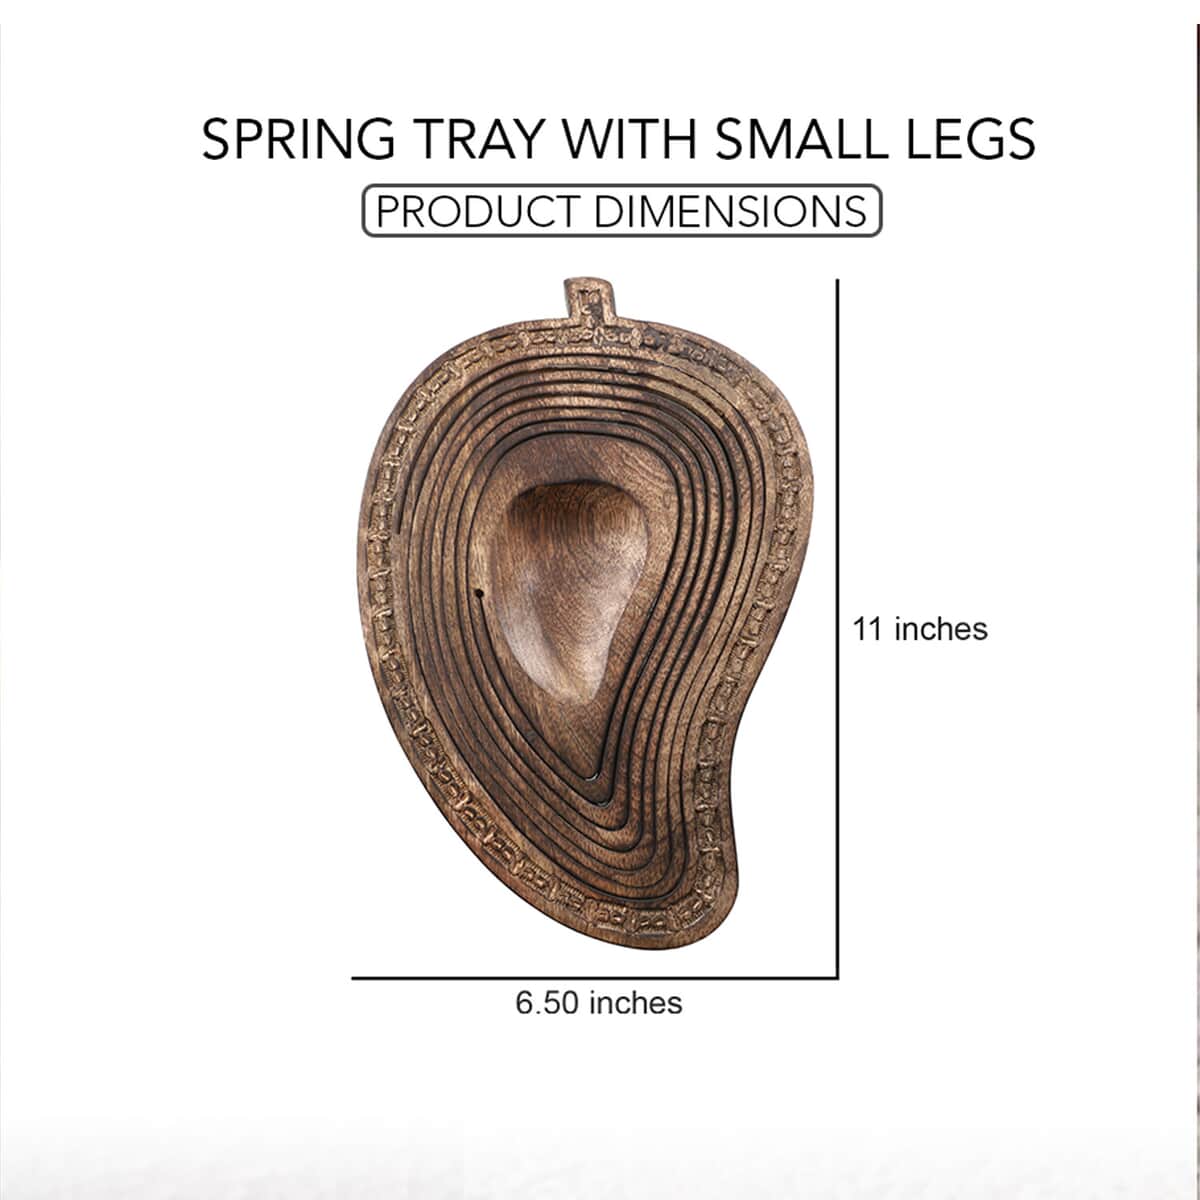 Mango Shape Hand carved Wooden Spring Tray with Small Legs, COLOR: Natural brown image number 3